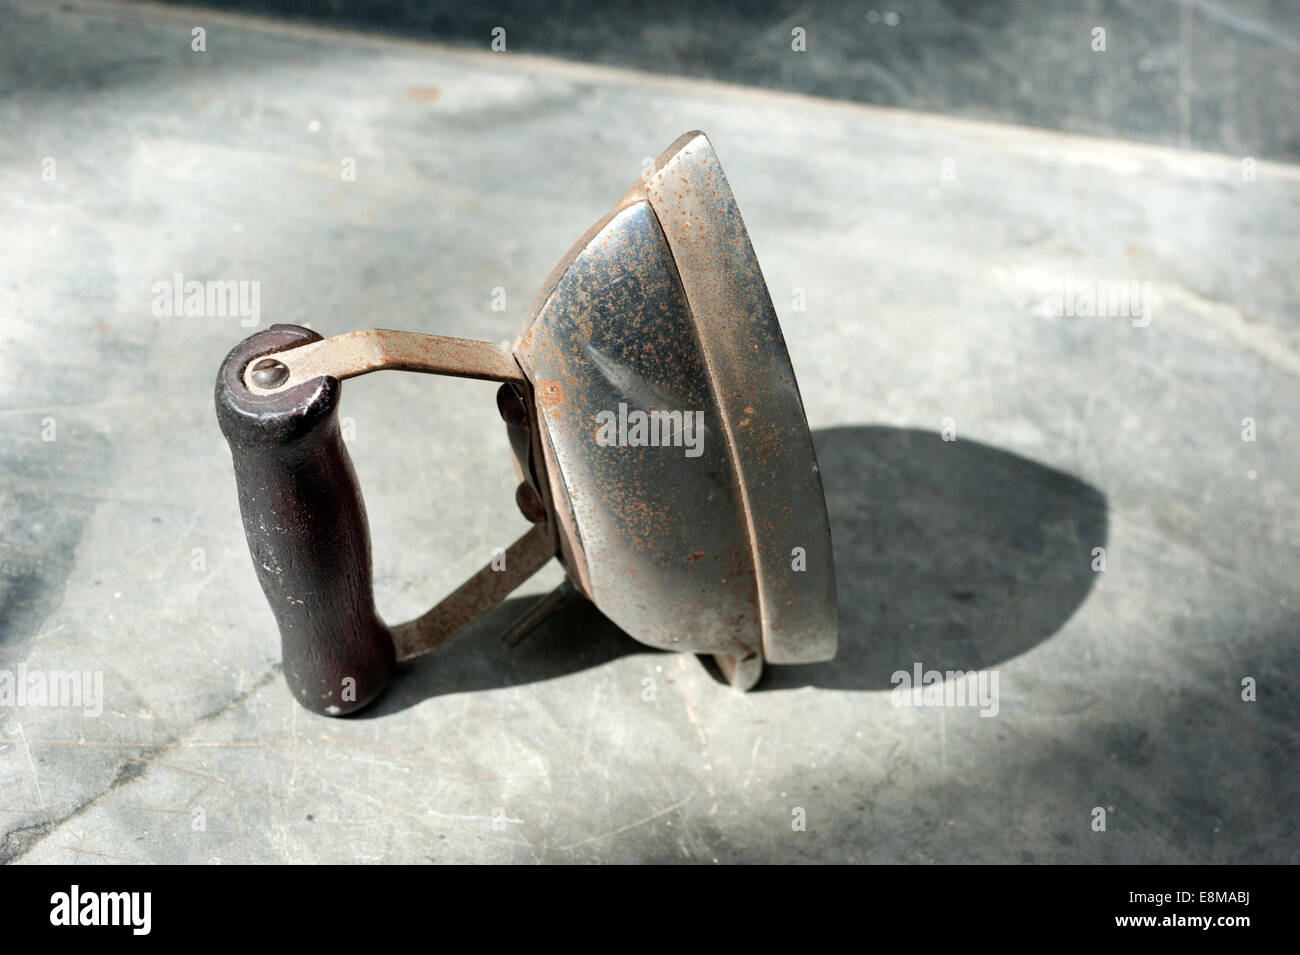 An old battered portable small electric travelling Iron bought to celebrate a Sixth Wedding Anniversary (IRON) Stock Photo